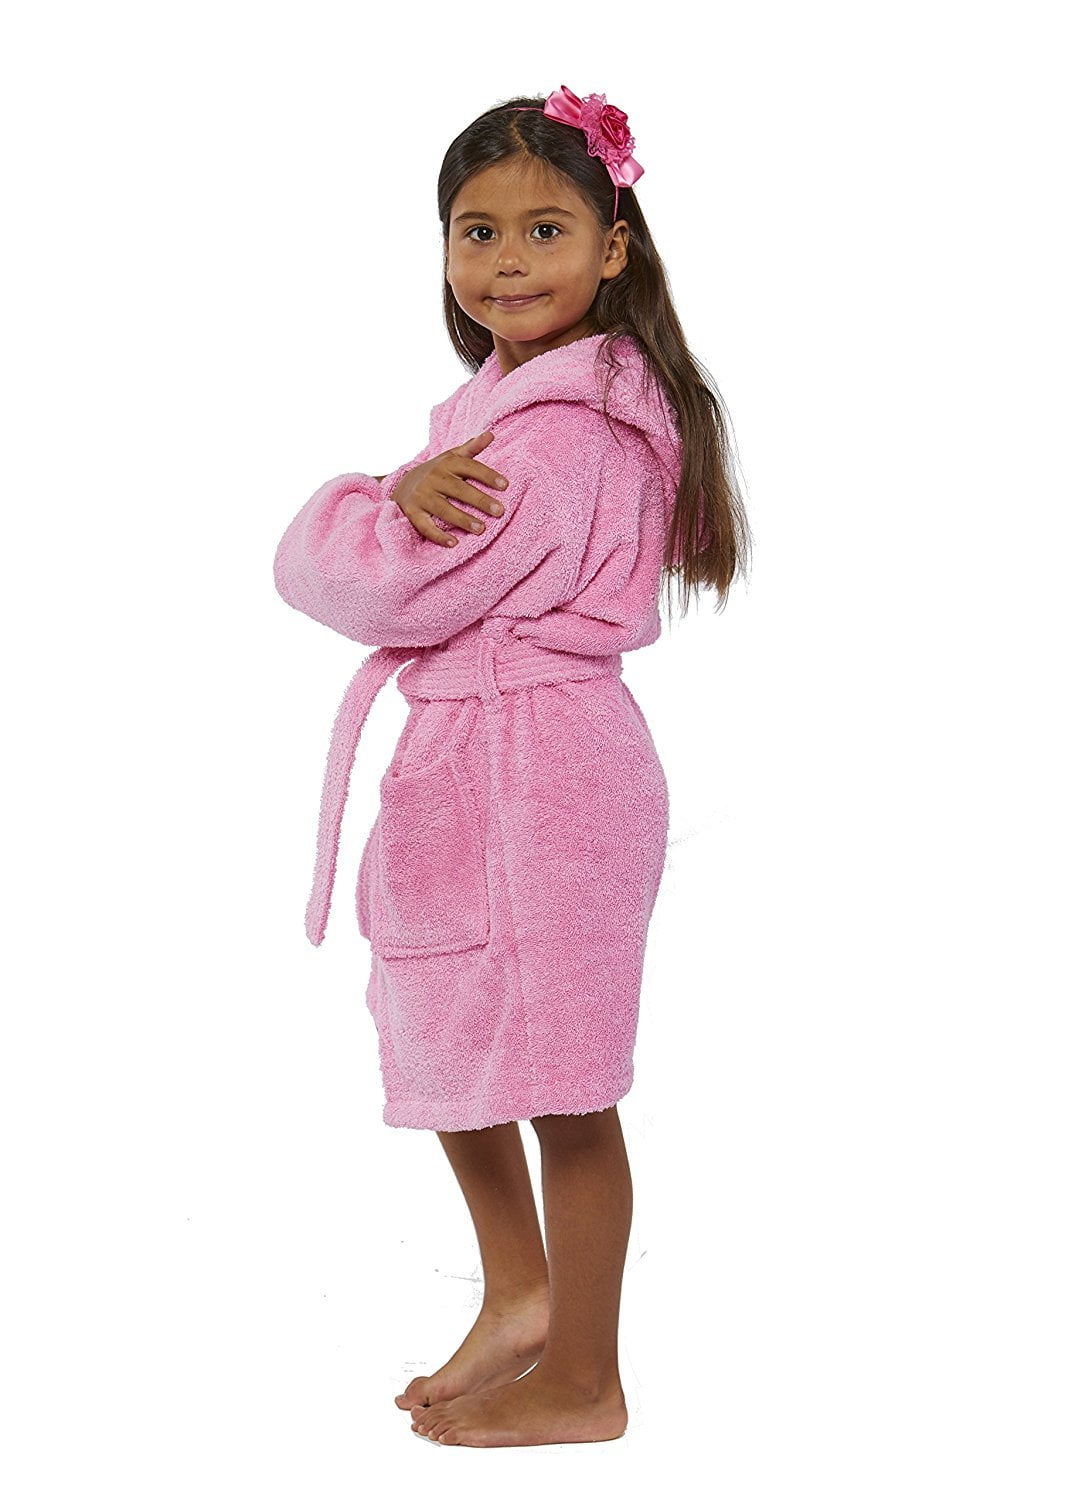 Kids Robes :: Terry Kids Robes :: 100% Turkish Cotton Pink Hooded Terry  Kid's Bathrobe - Wholesale bathrobes, Spa robes, Kids robes, Cotton robes,  Spa Slippers,… | Kids robes, Turkish cotton, Cotton robe